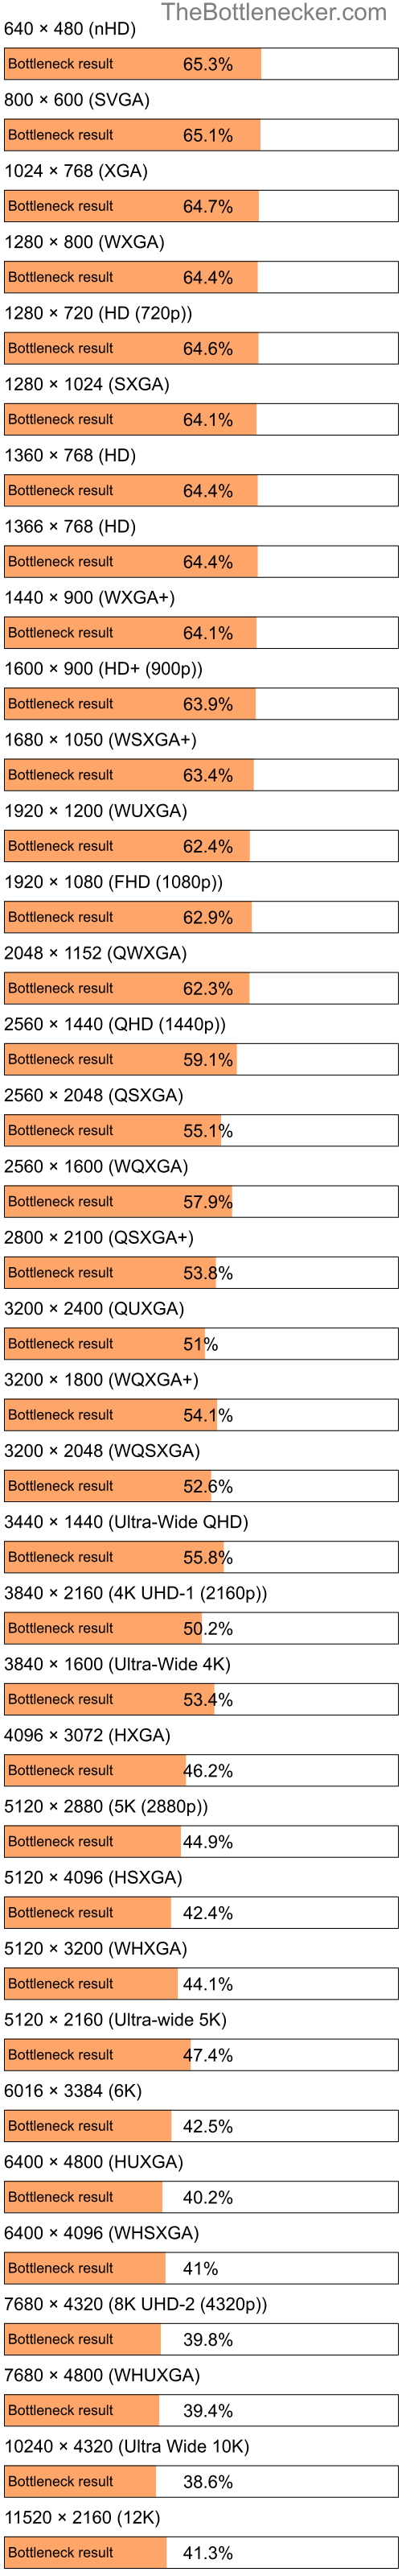 Bottleneck results by resolution for AMD Phenom II X4 960T and NVIDIA GeForce RTX 3070 Ti in Graphic Card Intense Tasks